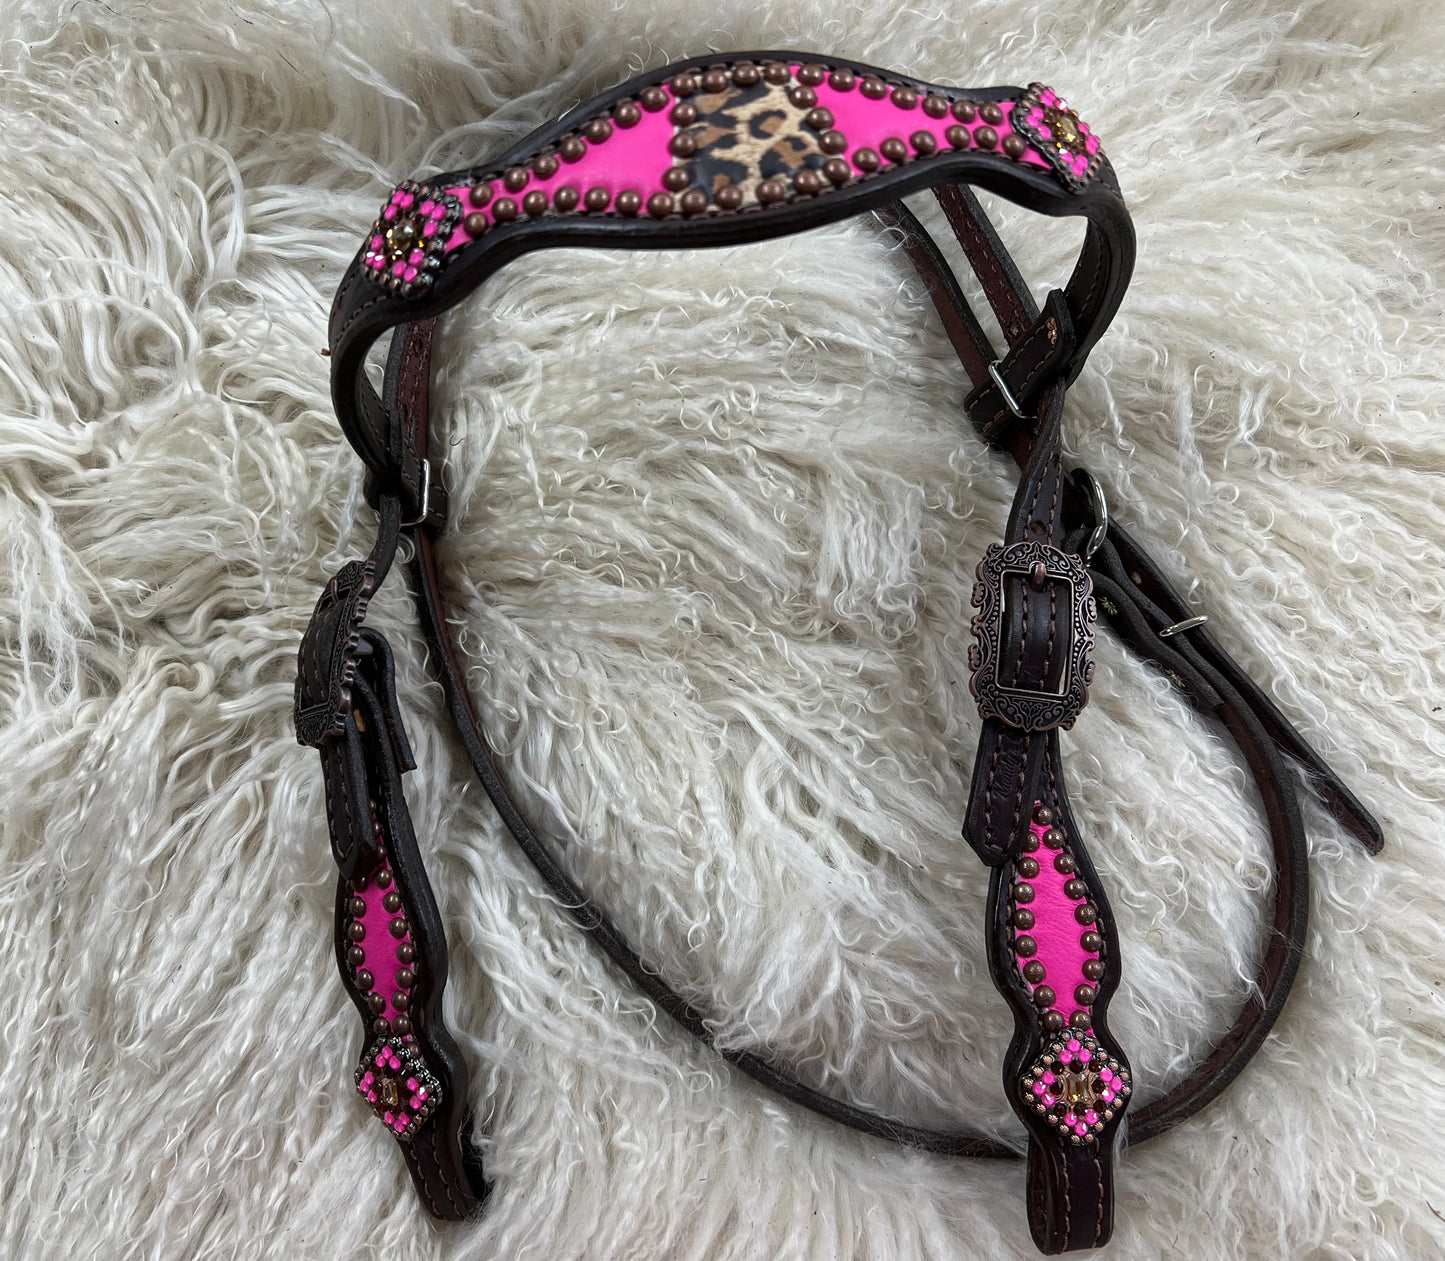 Hot pink and Leopard on dark leather